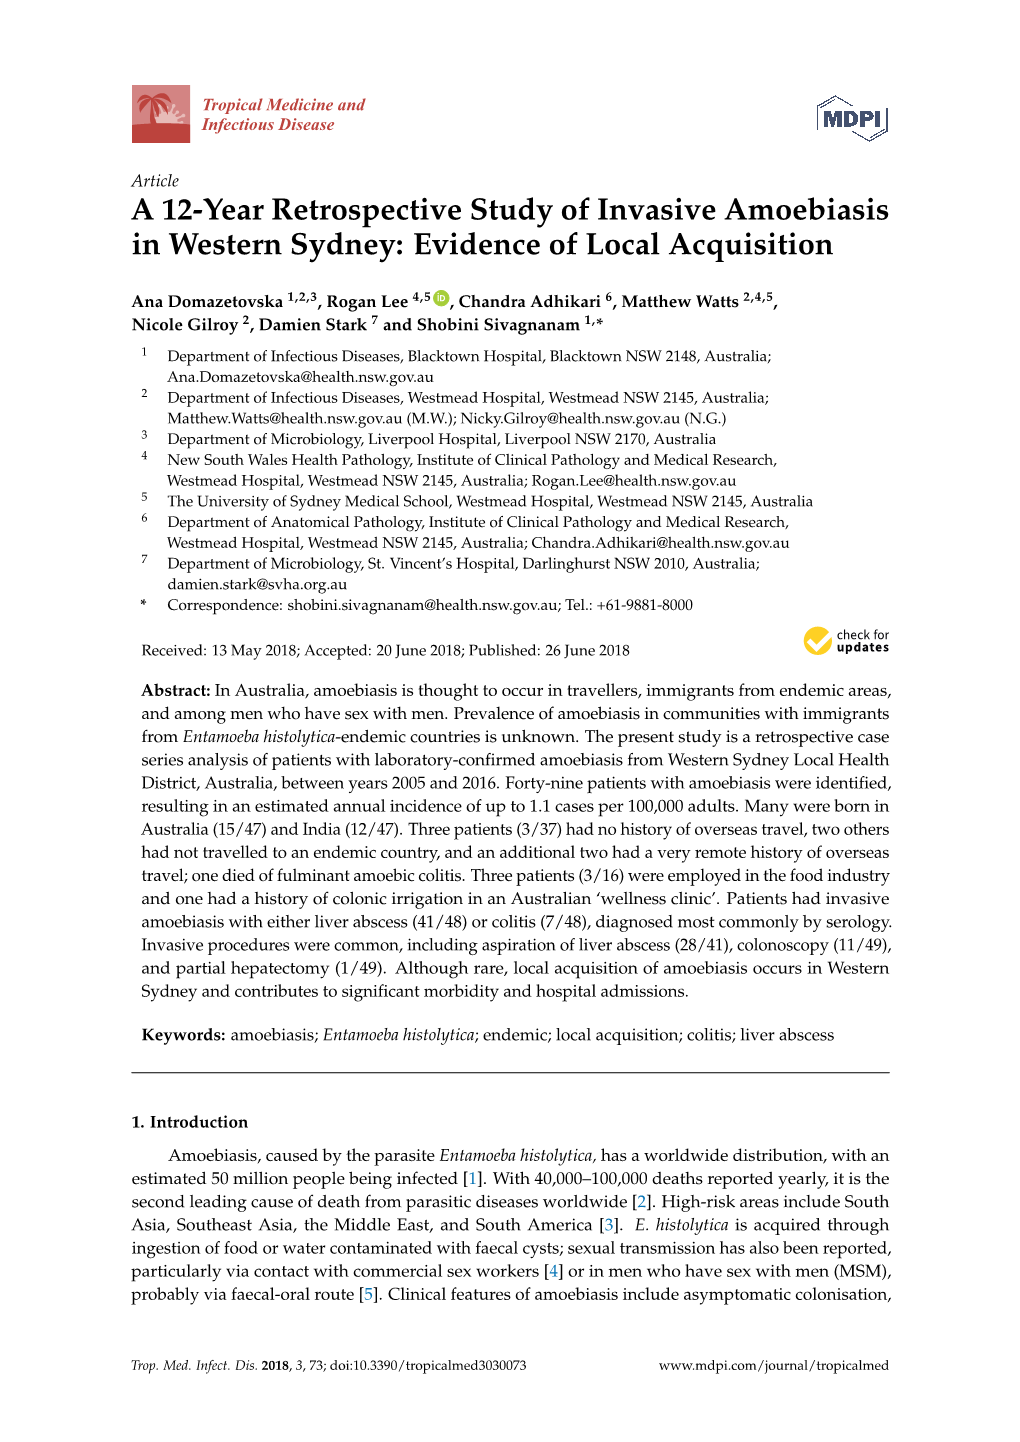 A 12-Year Retrospective Study of Invasive Amoebiasis in Western Sydney: Evidence of Local Acquisition